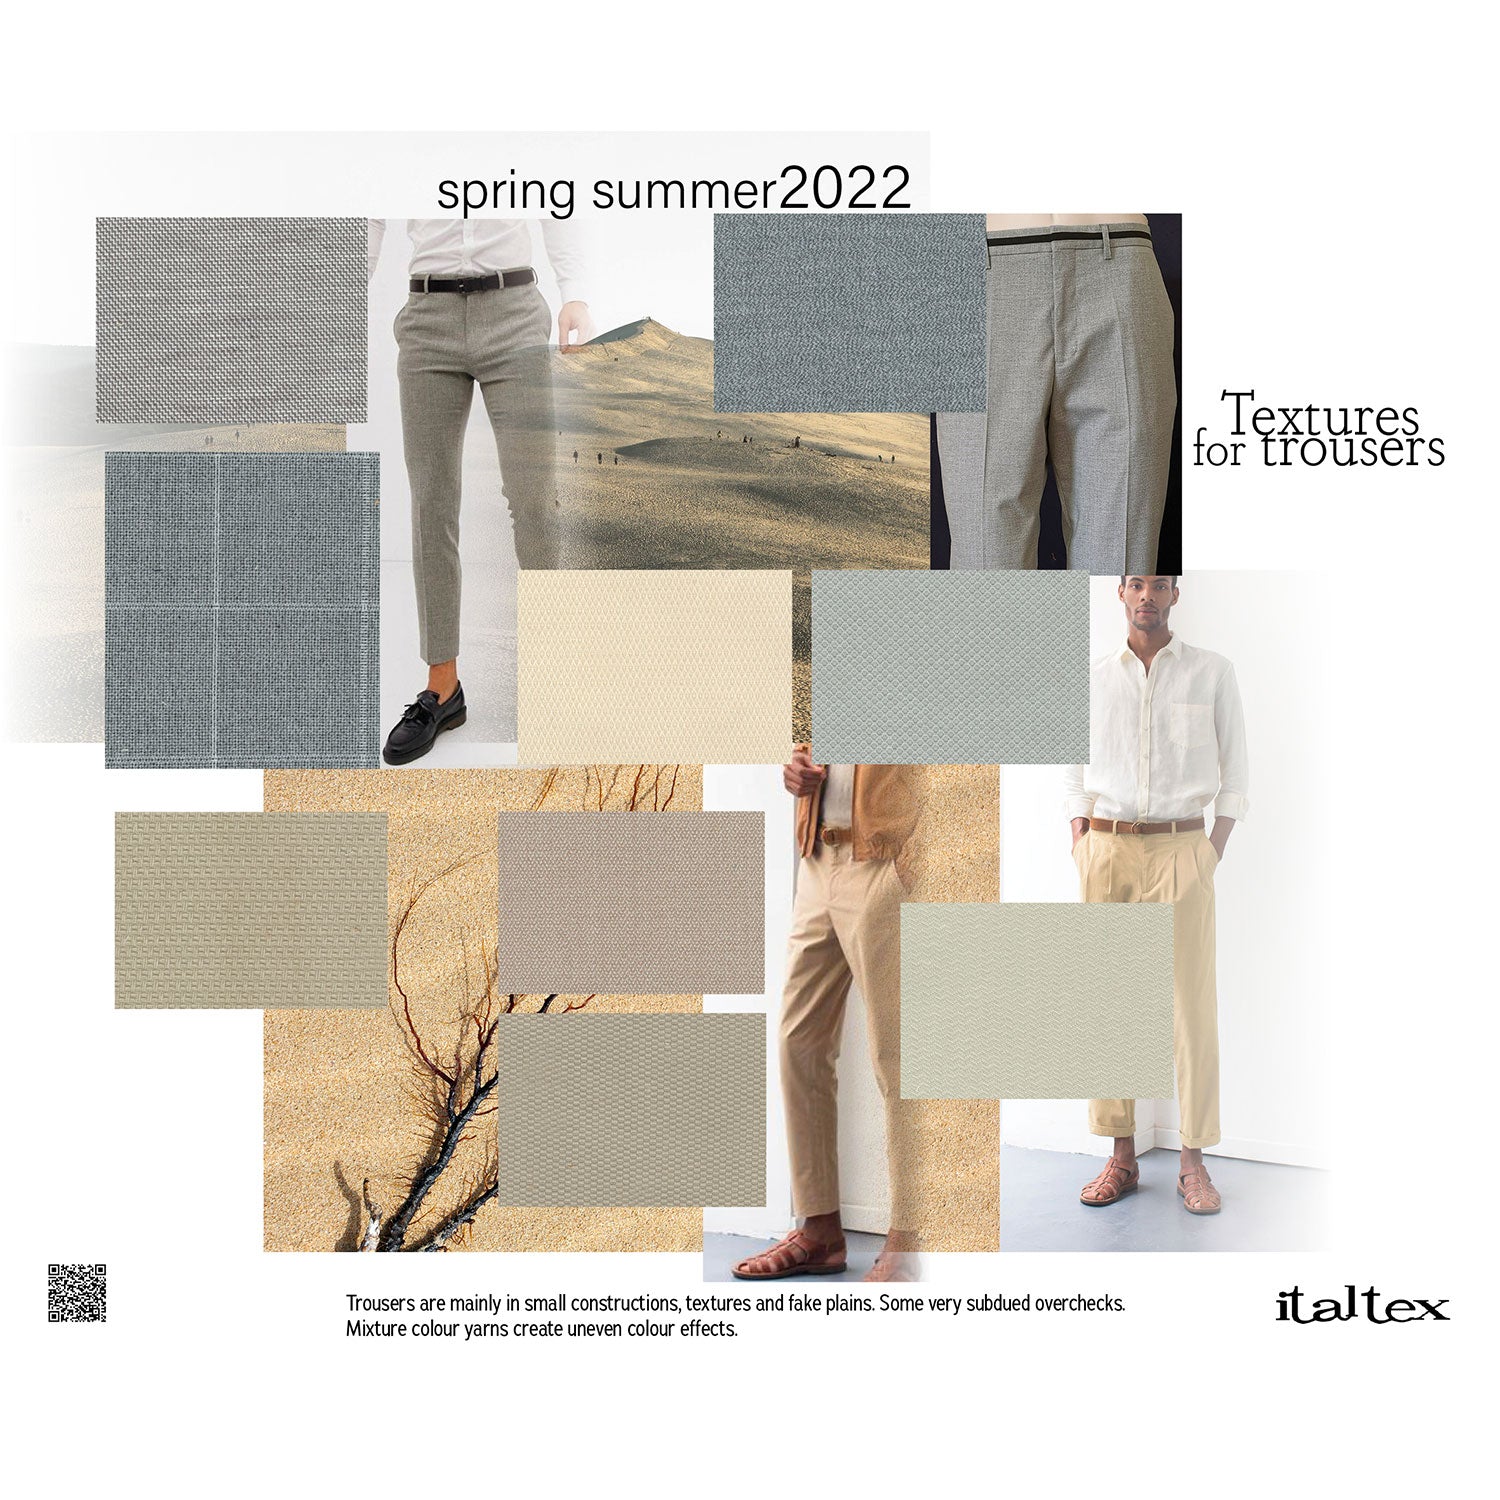 Menswear Colour and Fabric Trends SS 2022